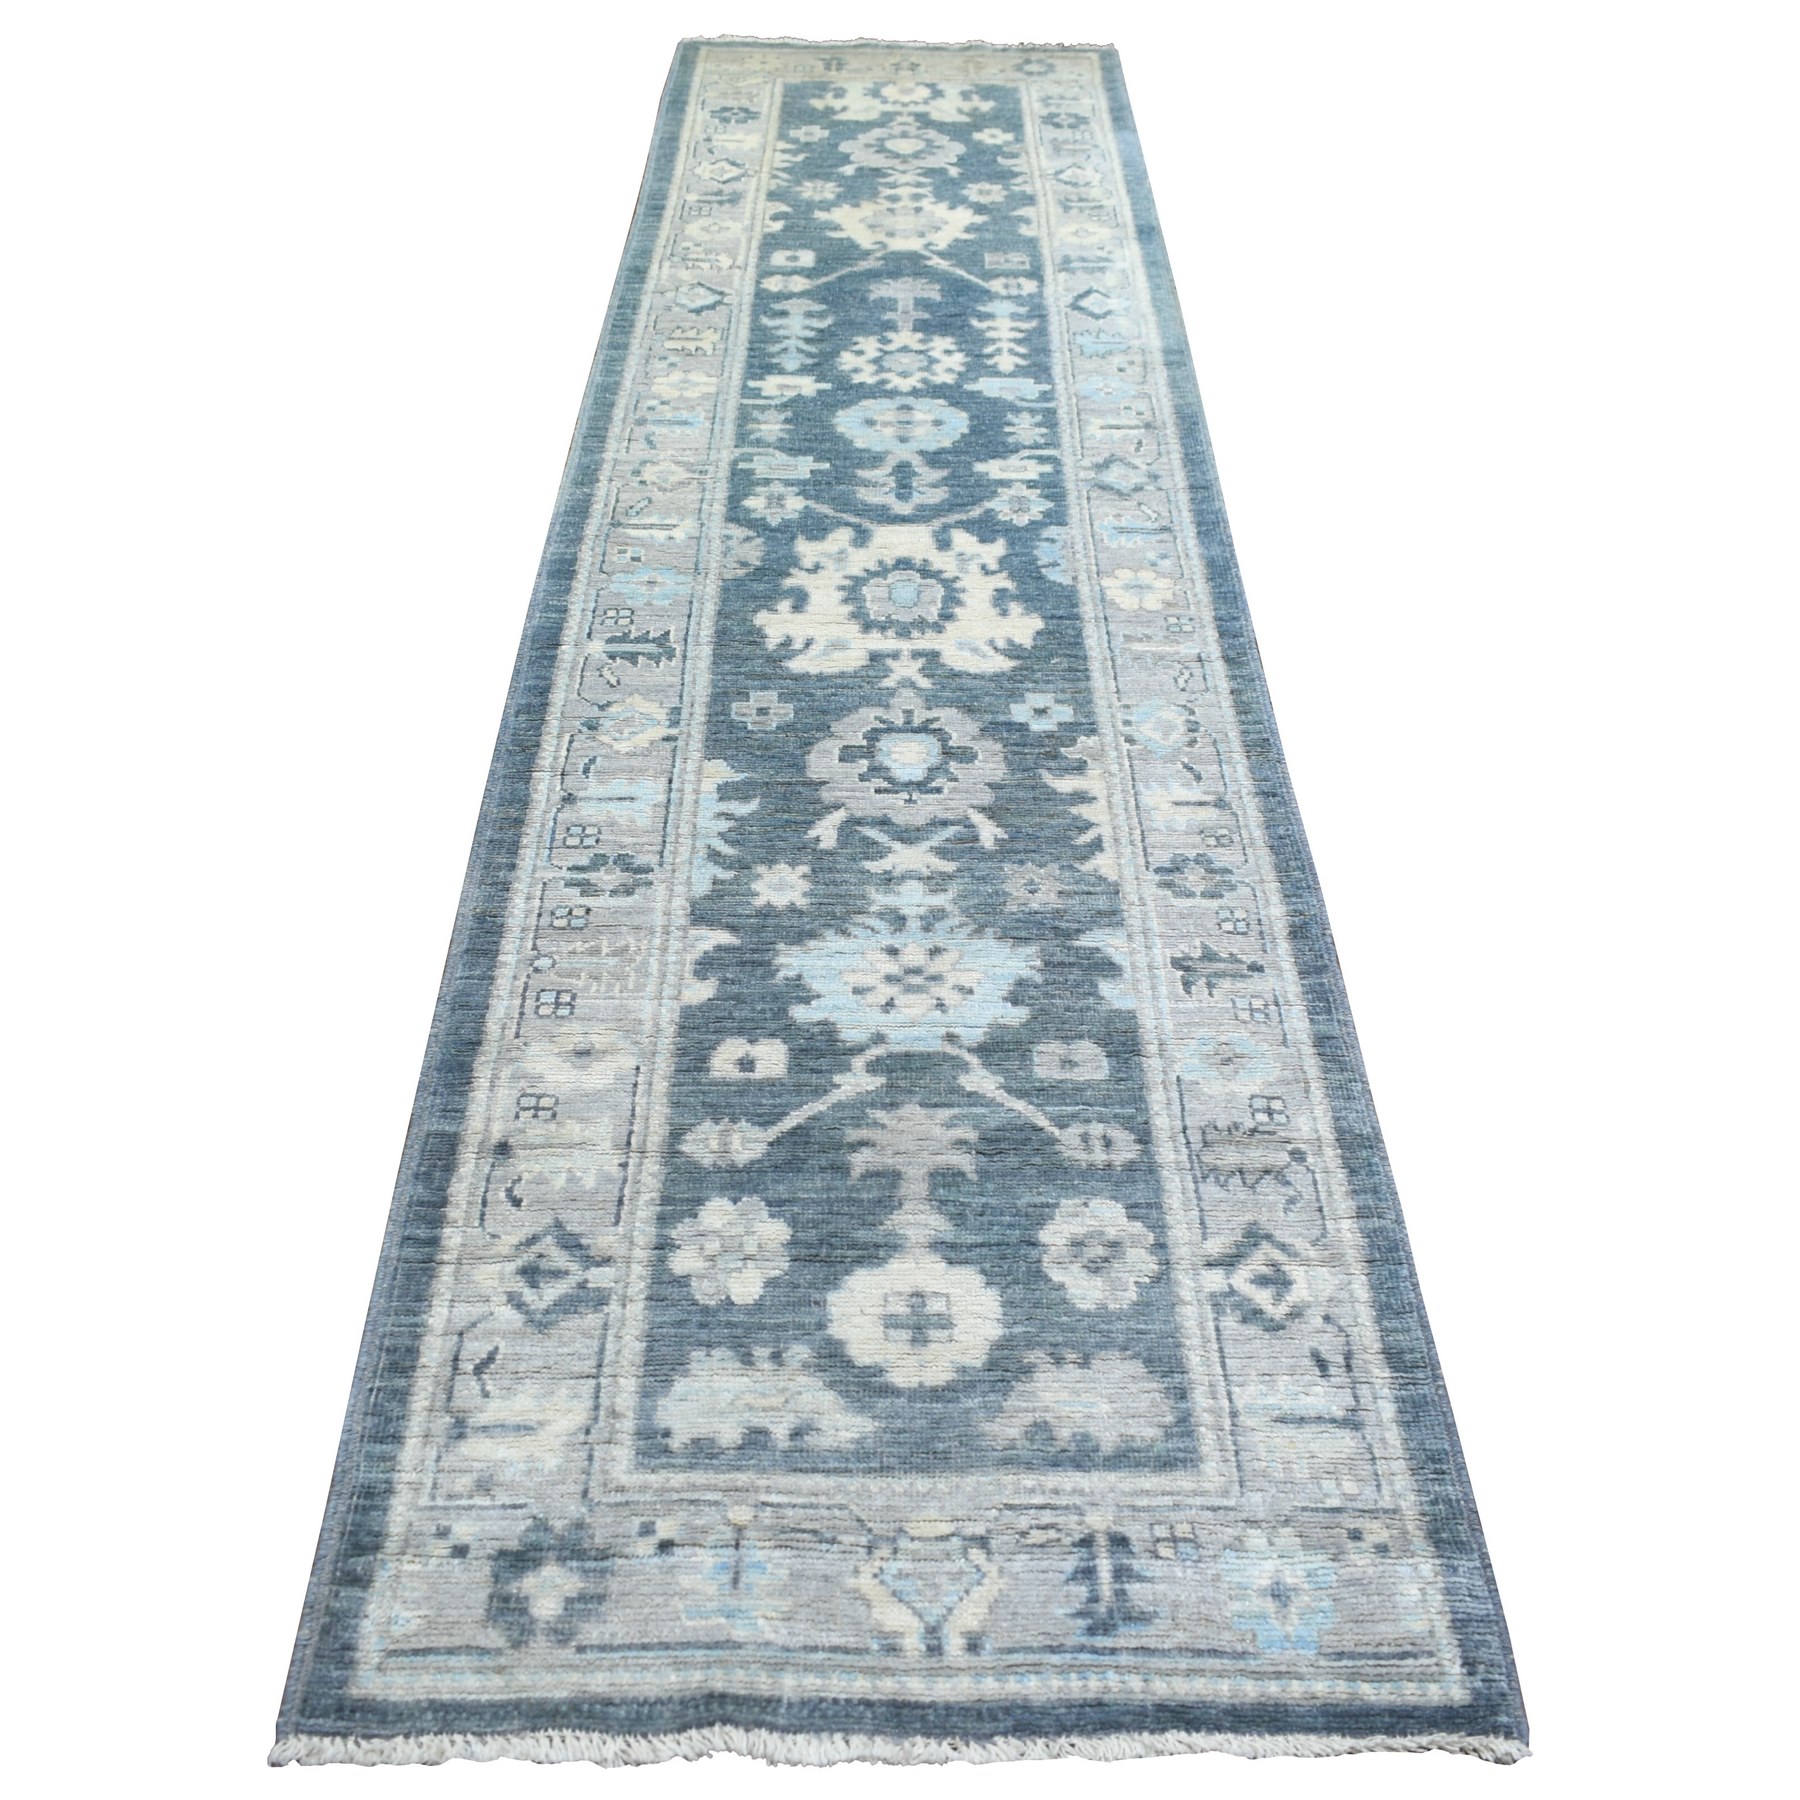 3'x11'7" Charcoal Gray Angora Oushak With Colorful Leaf Design Natural Dyes, Afghan Wool Hand Woven Runner Oriental Rug 